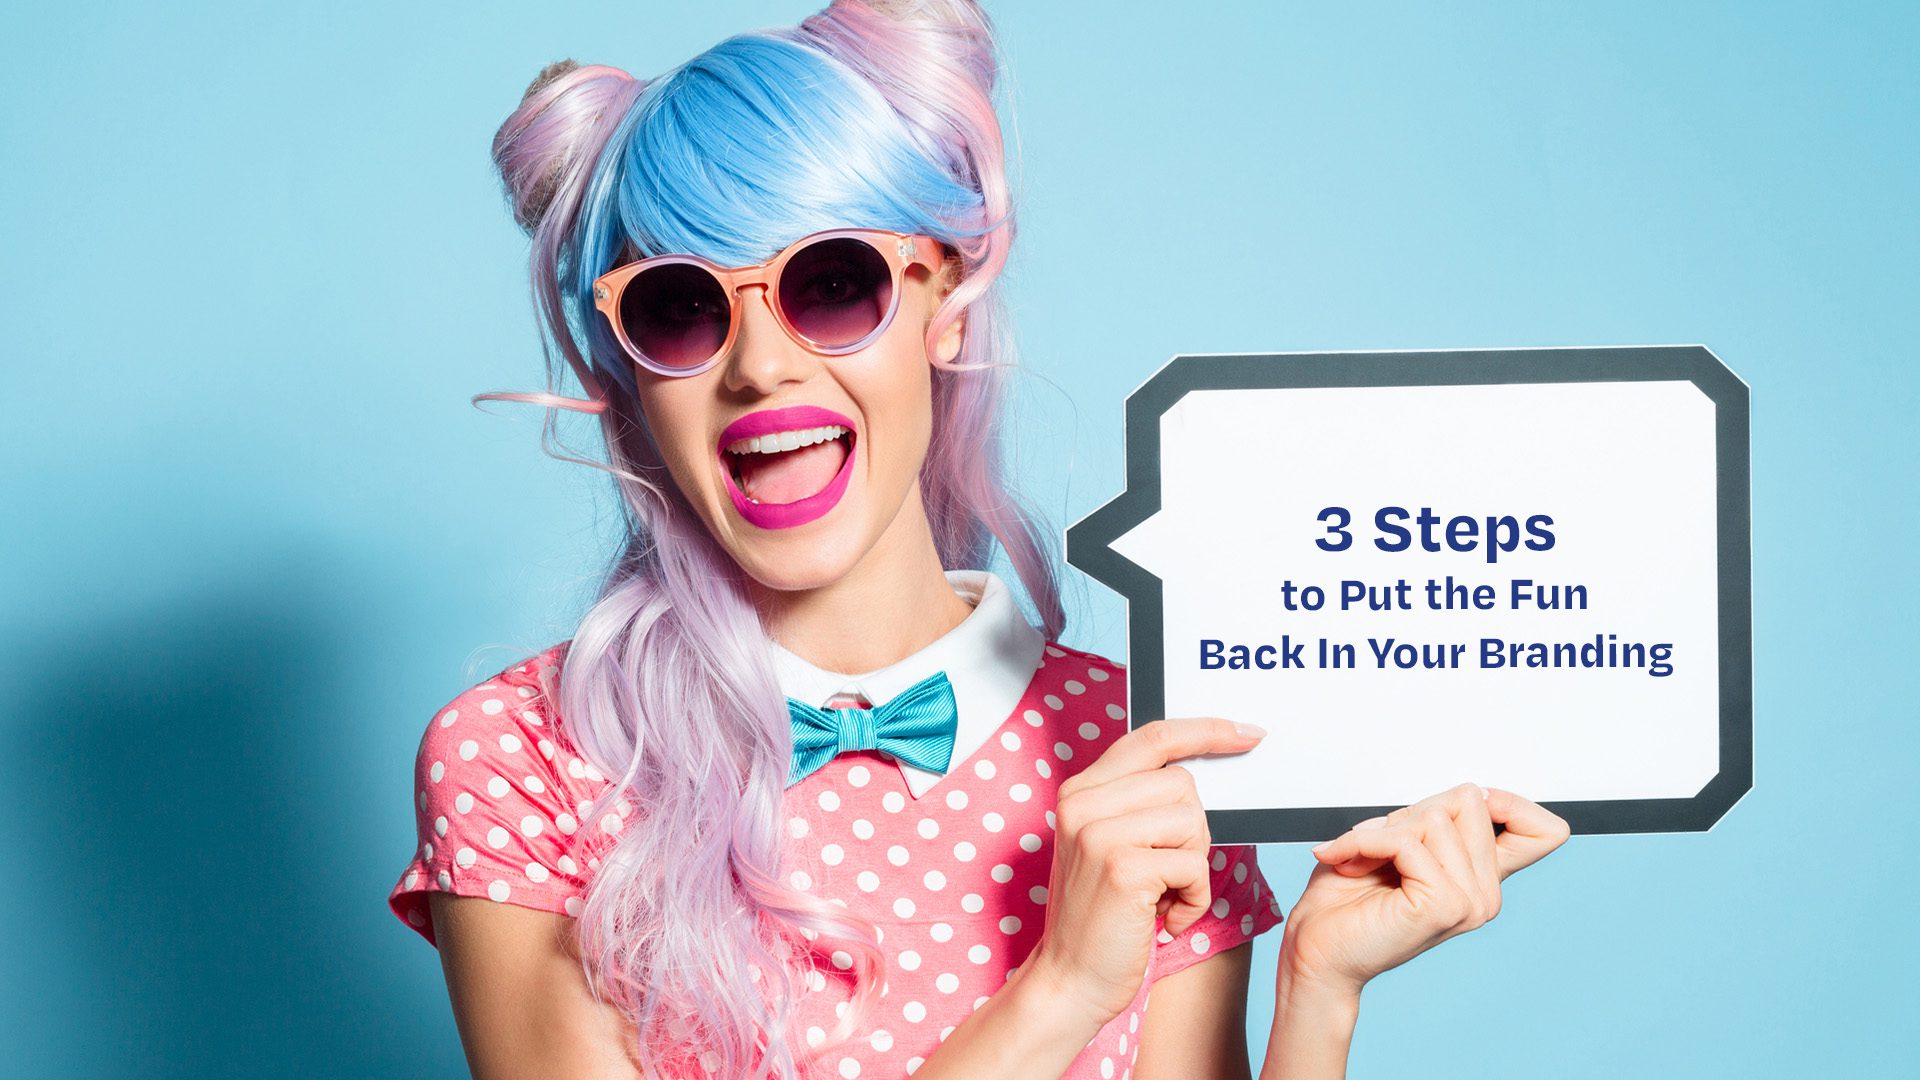 3 Steps to Put the Fun Back In Your Branding